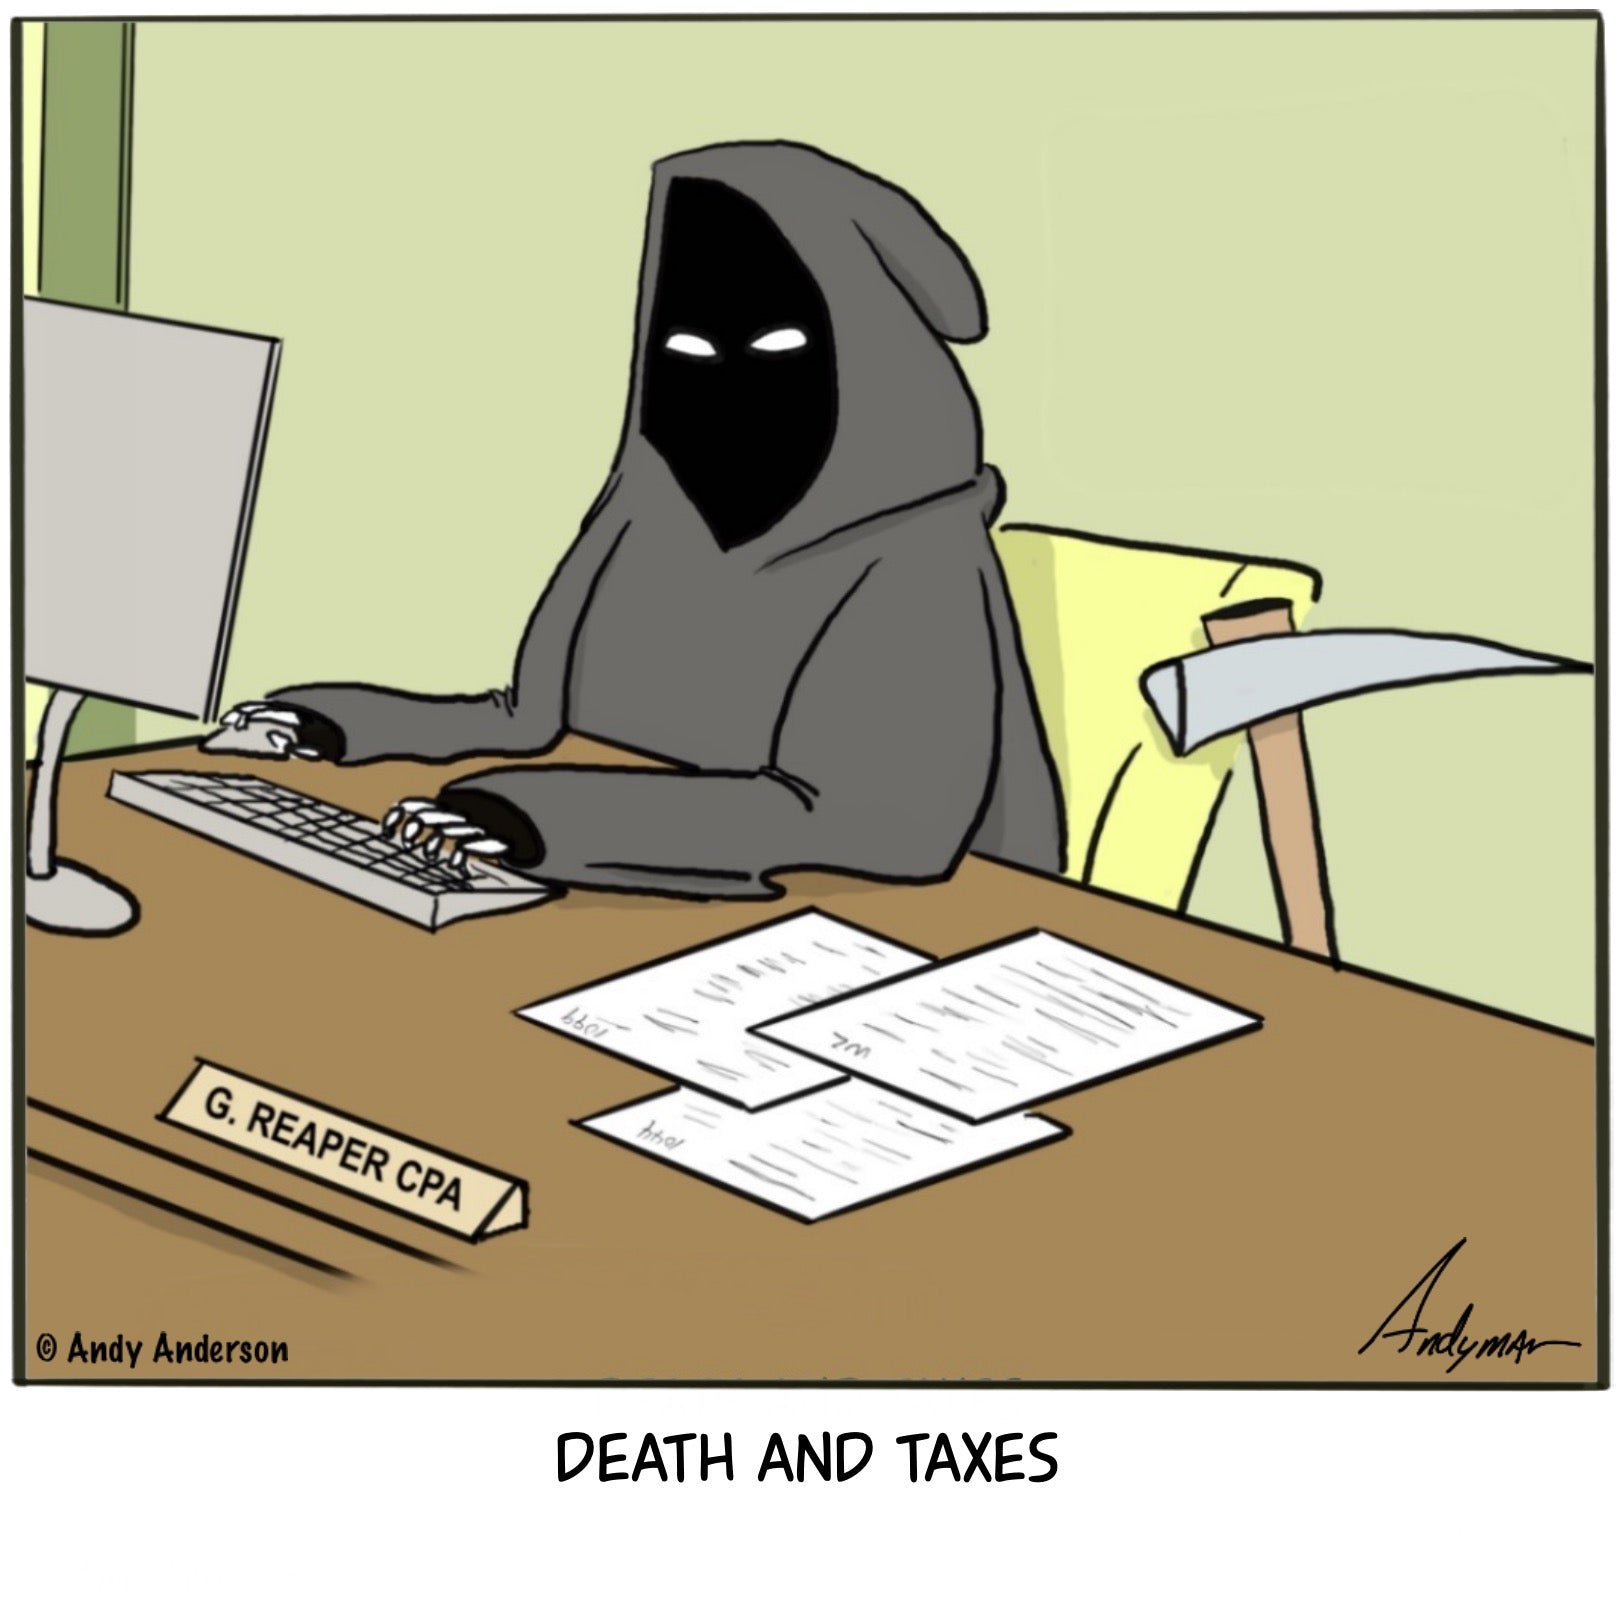 Cartoon about the Grim Reaper doing his taxes - Death and Taxes